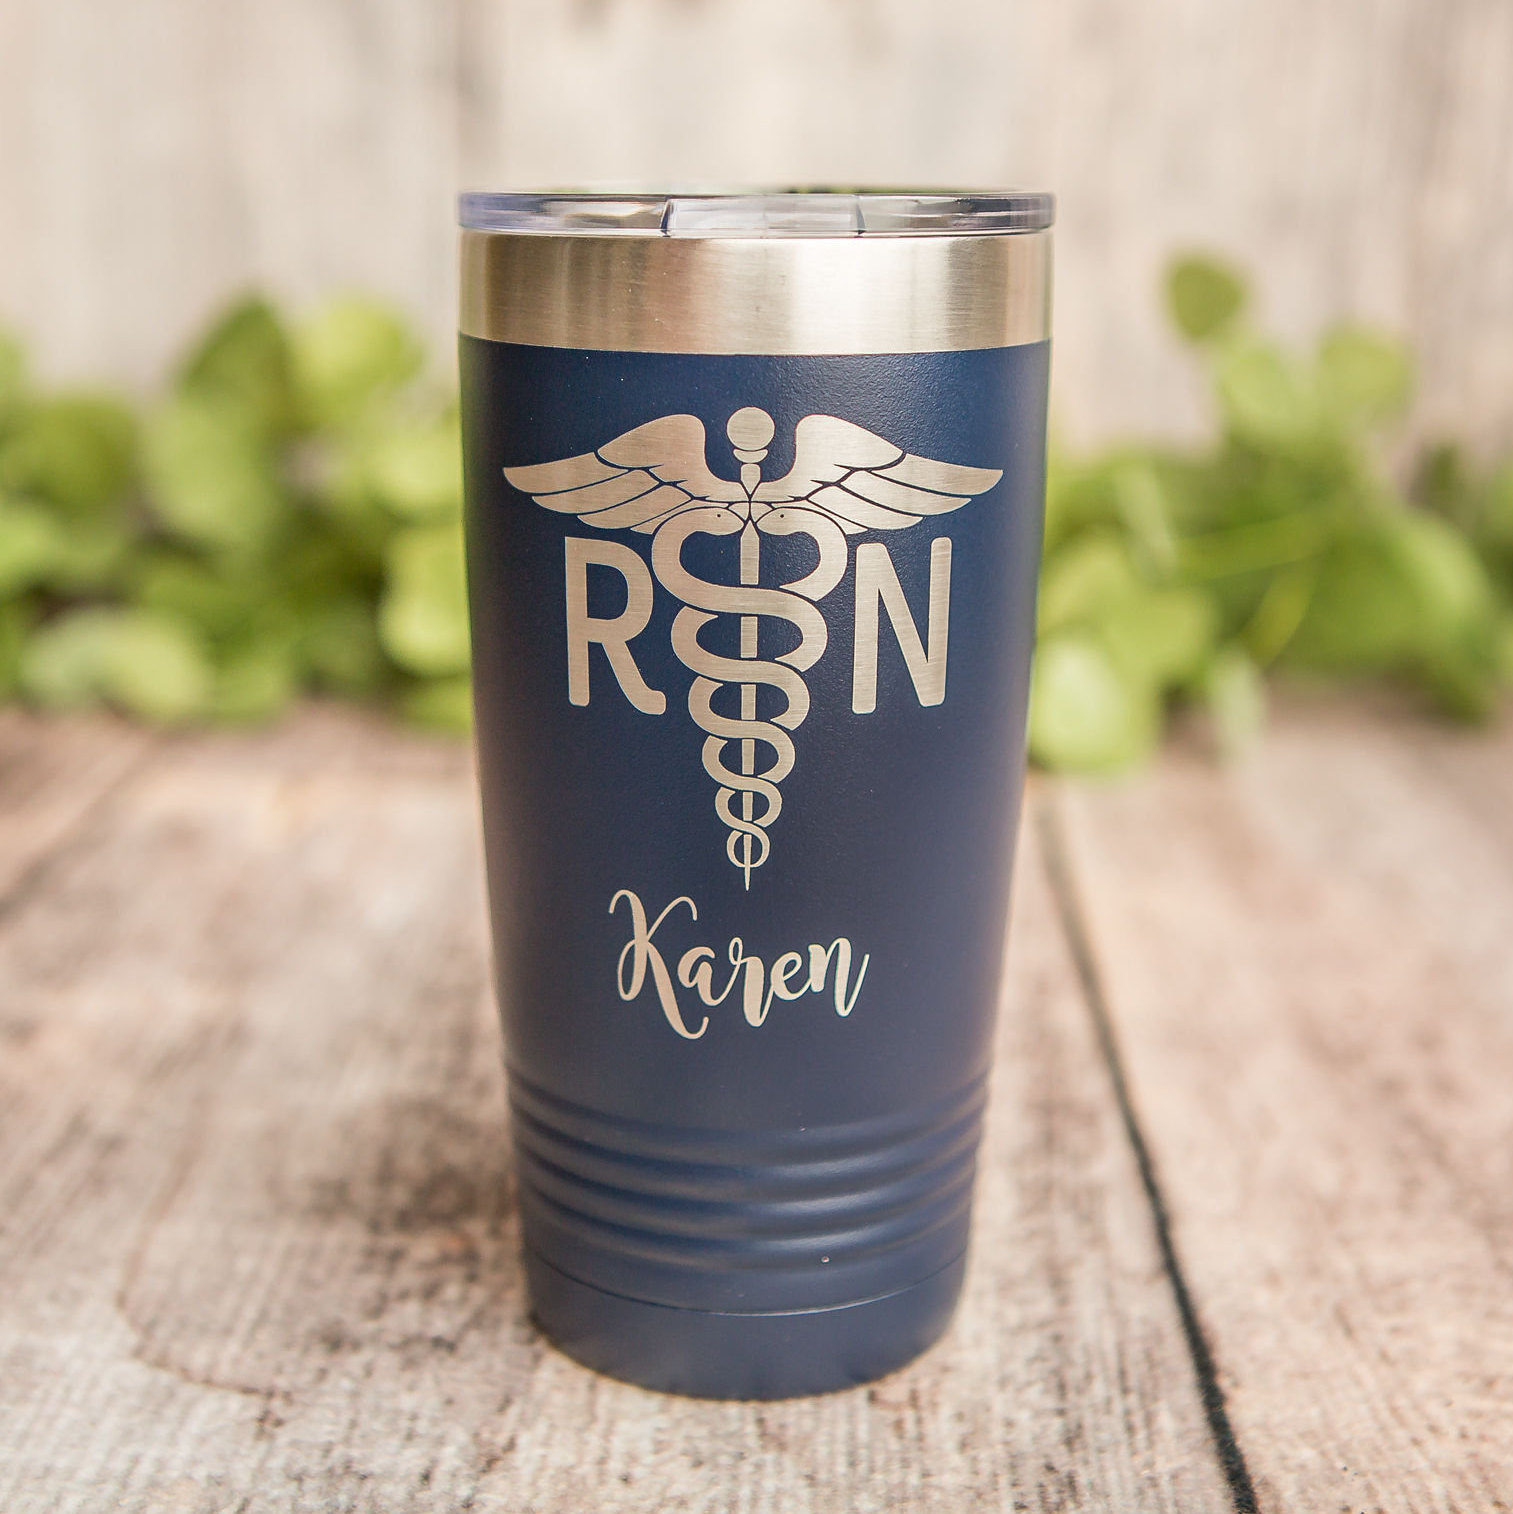 https://3cetching.com/wp-content/uploads/2020/09/registered-nurse-engraved-personalized-tumbler-with-name-yeti-style-cup-nurse-gift-5f5fb5cf.jpg